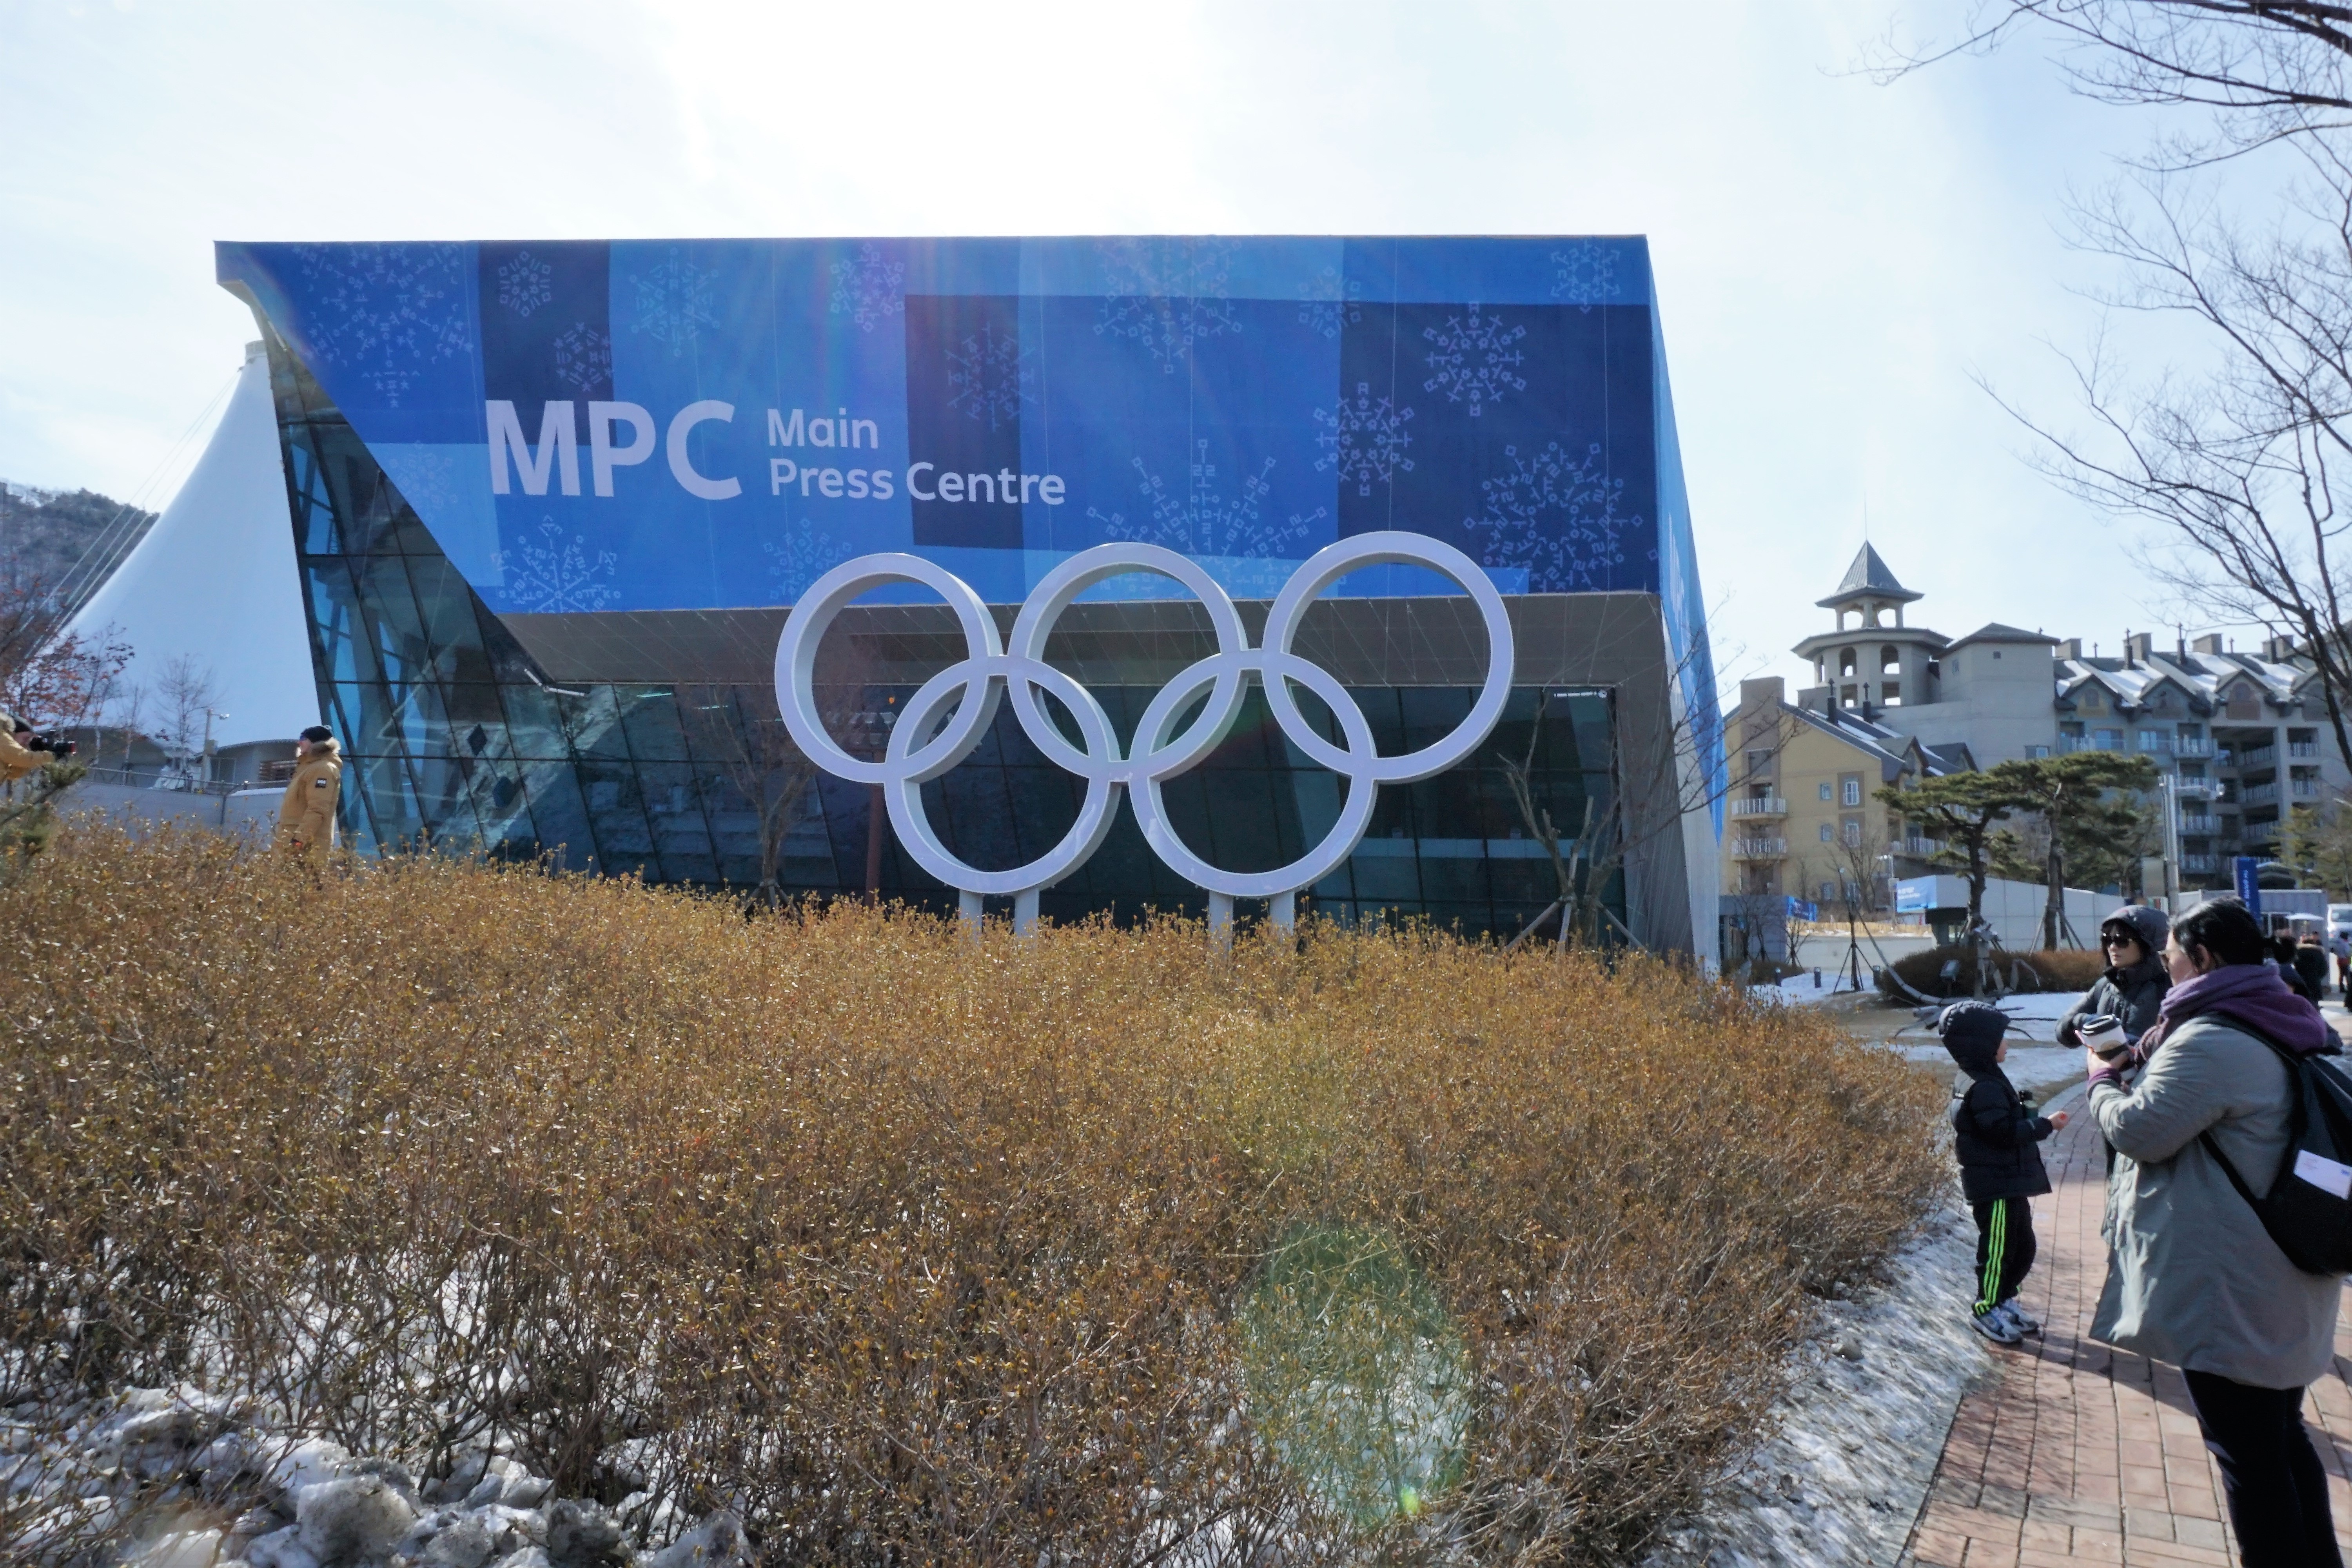 My Experience at  the 2018 Winter Olympics